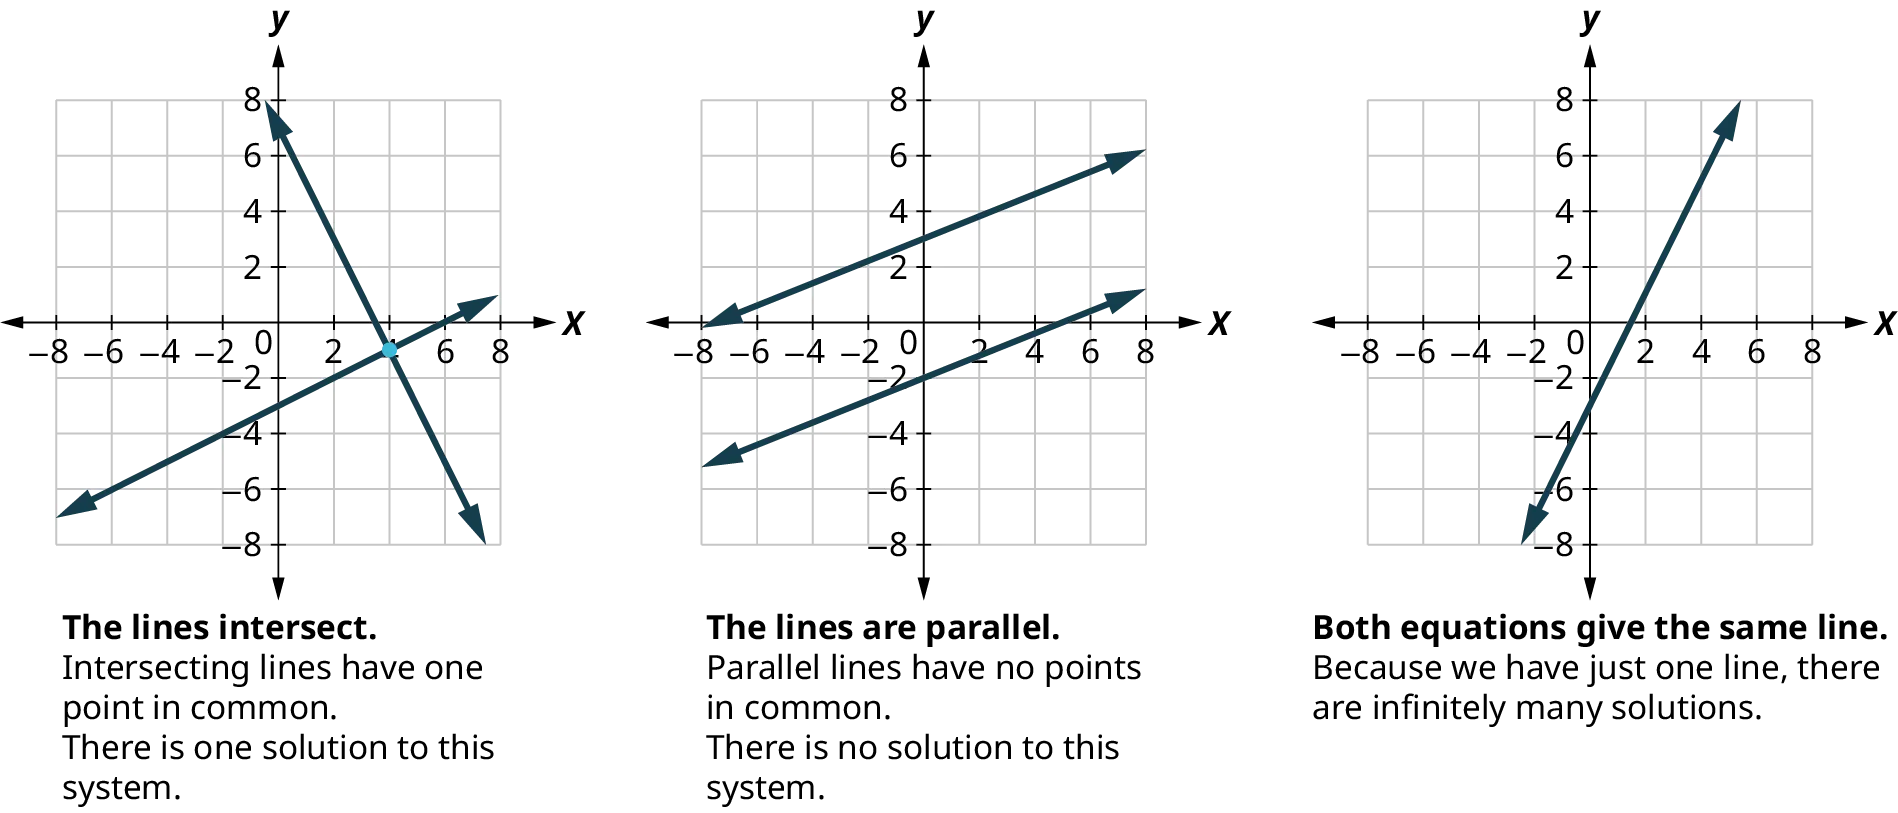 Three coordinate planes. The first coordinate plane shows one line passing through the points, (0, 7) and (3.5, 0) and a second line passing through the points, (0, negative 3) and (6, 0). The two lines intersect at the point (4, negative 1). Text reads, The lines intersect. Intersecting line shave one point in common. There is one solution to this system. The second coordinate plane shows one line passing through the points, (negative 8, 0) and (0, 3) and a second line passing through the points, (0, negative 2) and (5, 0). The lines do not intersect. Text reads, The lines are parallel. Parallel lines have no points in common. There is no solution to this system. The third coordinate plane shows a line passing through the points, (0, negative 3) and (1.5, 0). Text reads, Both equations give the same line. Because we have just one line, there are infinitely many solutions.